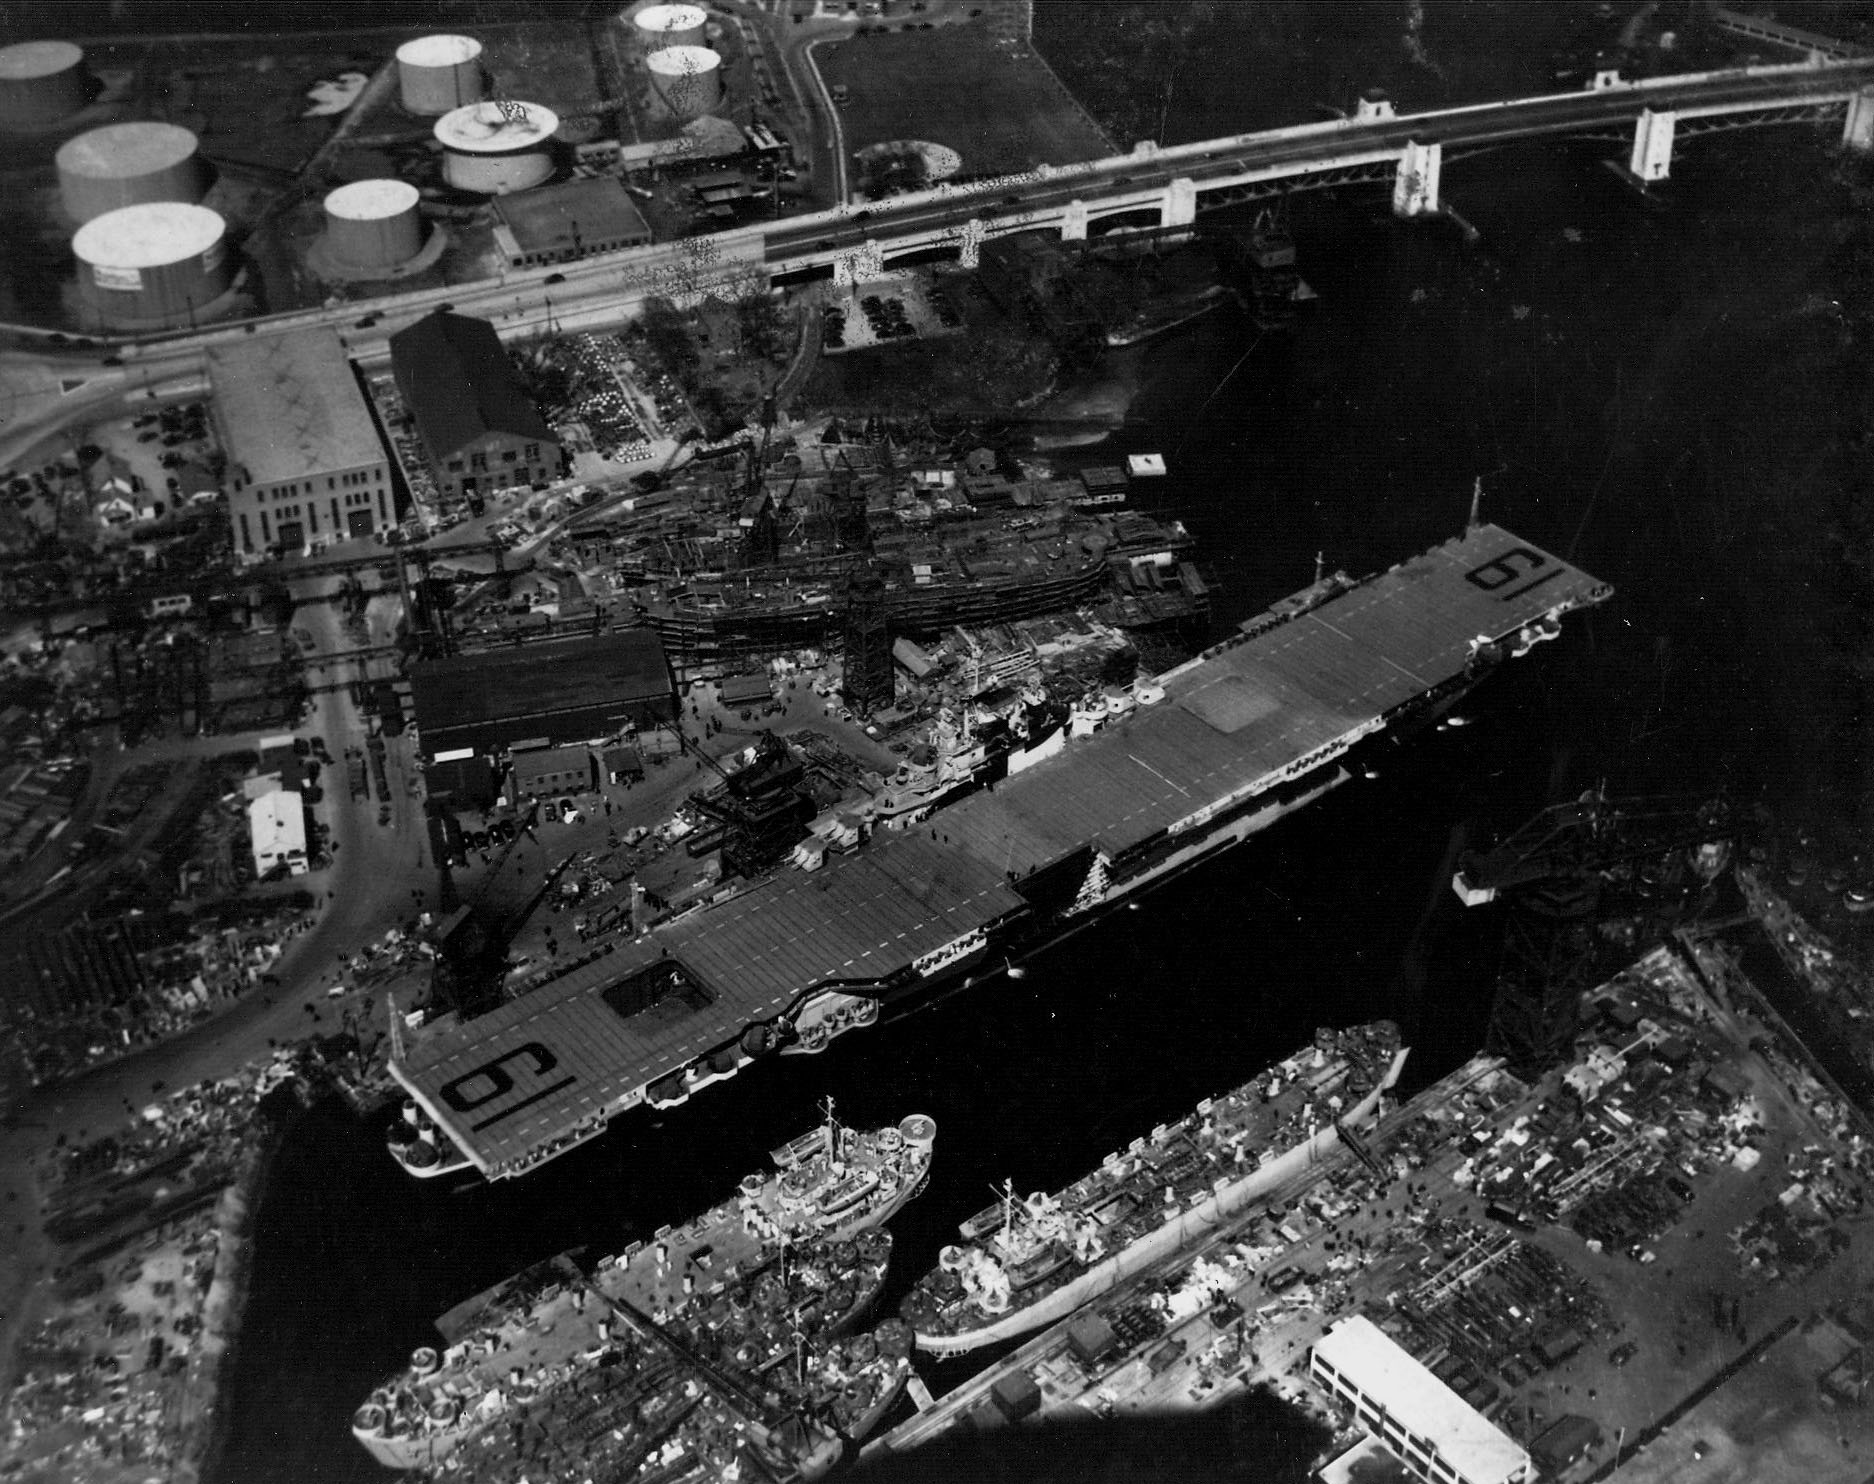 Essex-class Aircraft Carrier Hancock at the Fore River Shipyard, Quincy, Massachusetts, United States, 14 Apr 1944, the day before her commissioning.